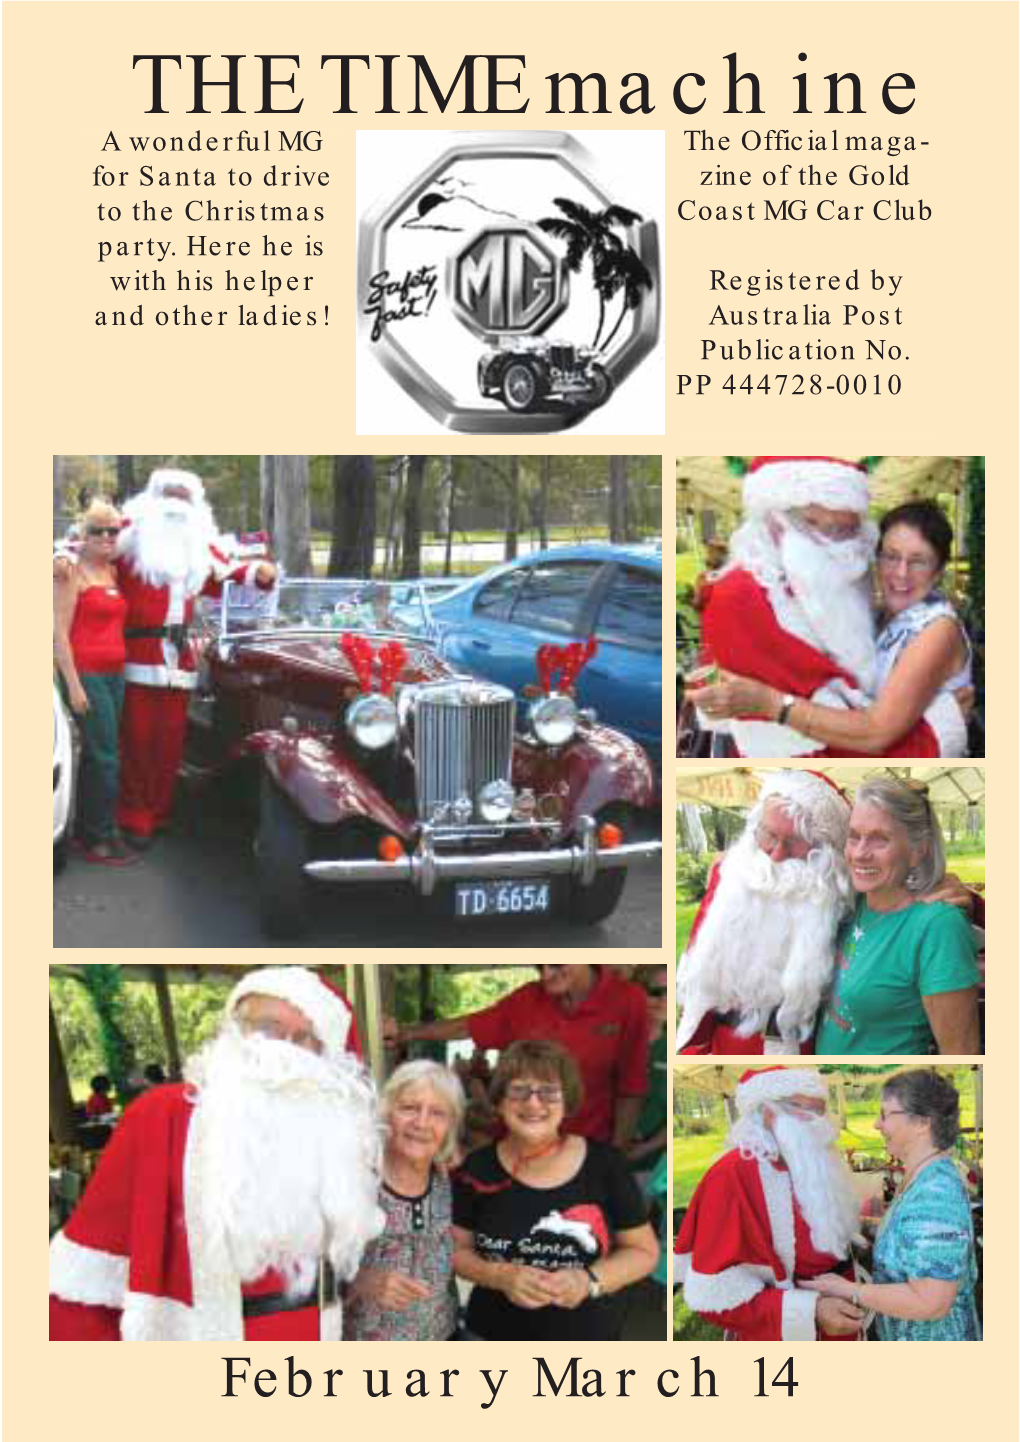 THE TIME Machine a Wonderful MG the Official Maga- for Santa to Drive Zine of the Gold to the Christmas Coast MG Car Club Party